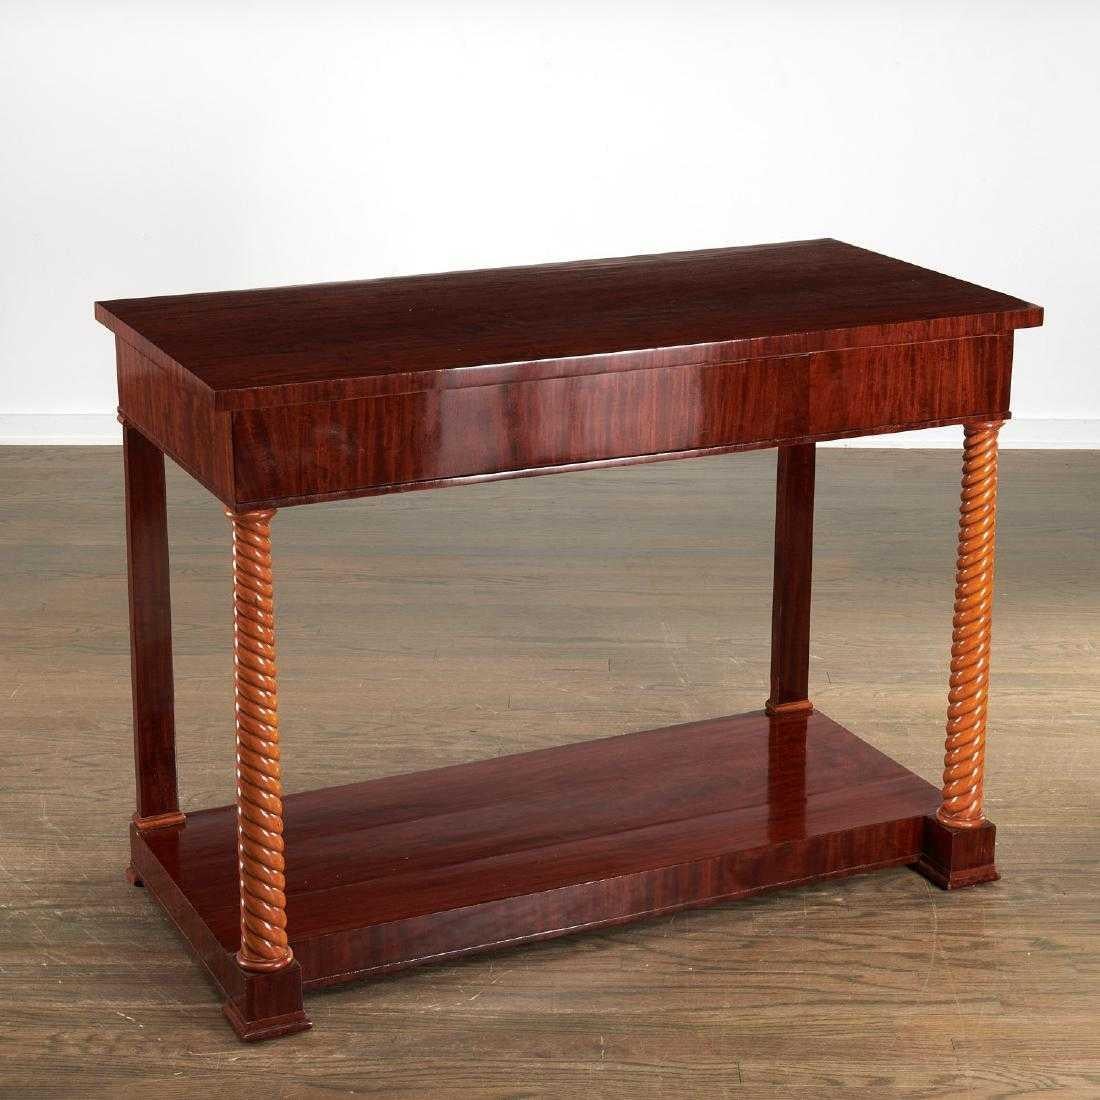 Biedermeier mahogany and fruitwood console or pier table of elegant proportions having a rectangular mahogany top resting on 2 front cord-shaped blond fruitwood columns. Inscribed in ink “E-1879”.
 